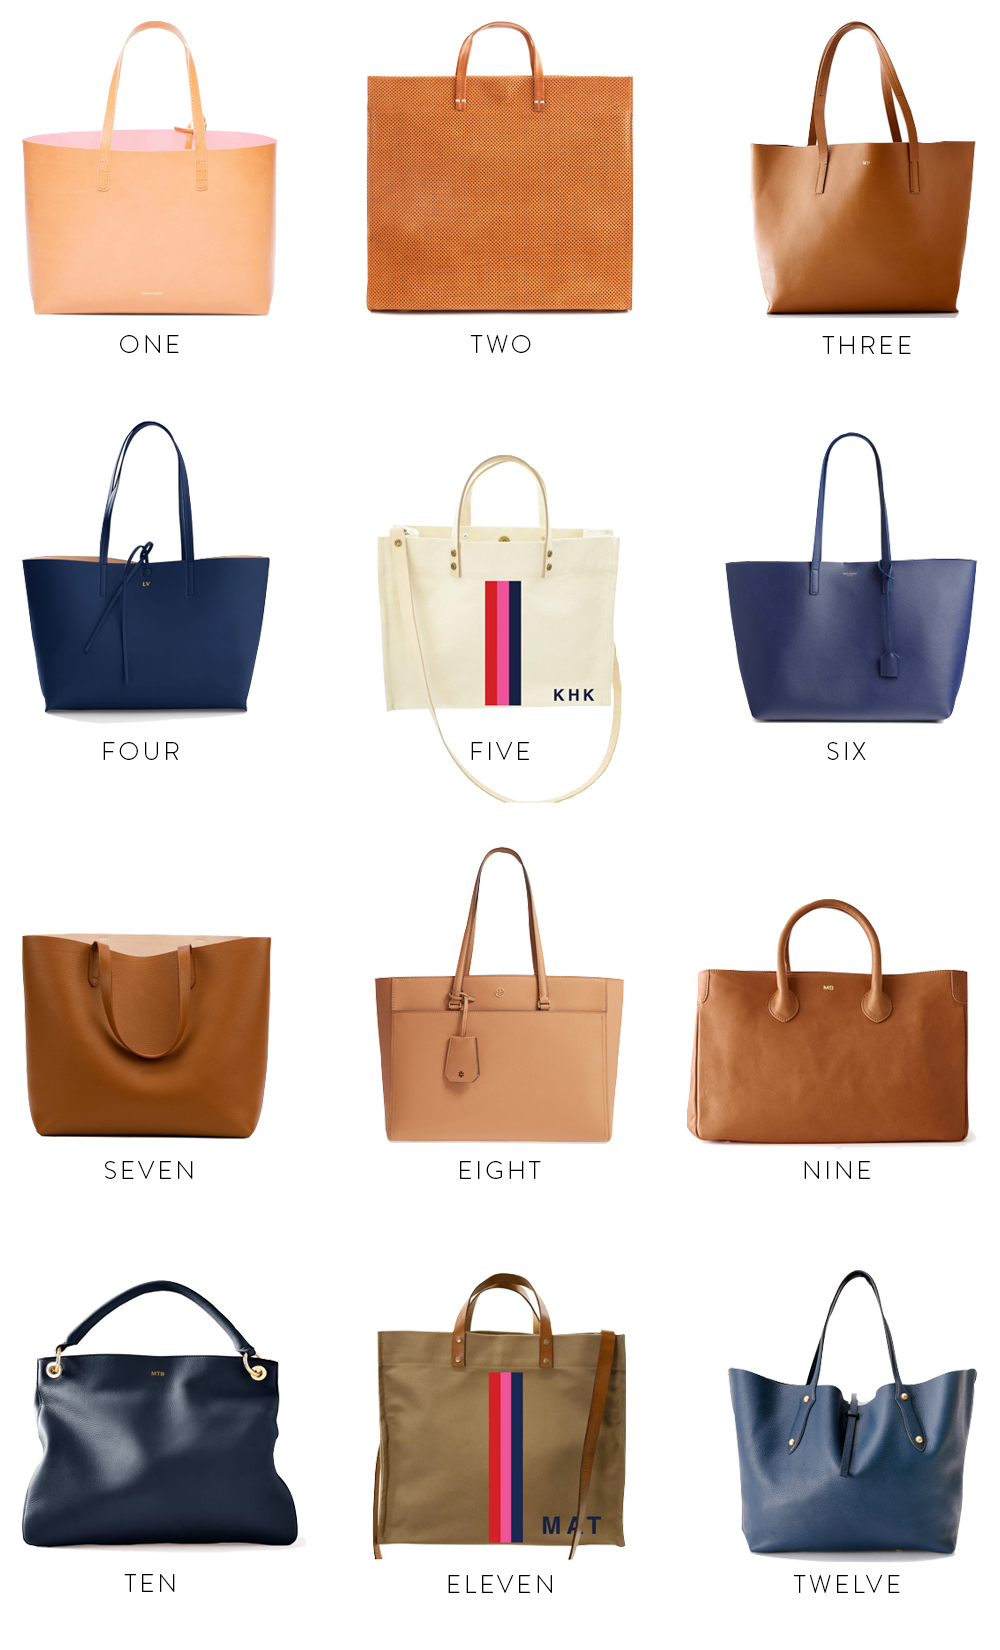 SHOPPING FOR A NEW TOTE BAG | Design Darling